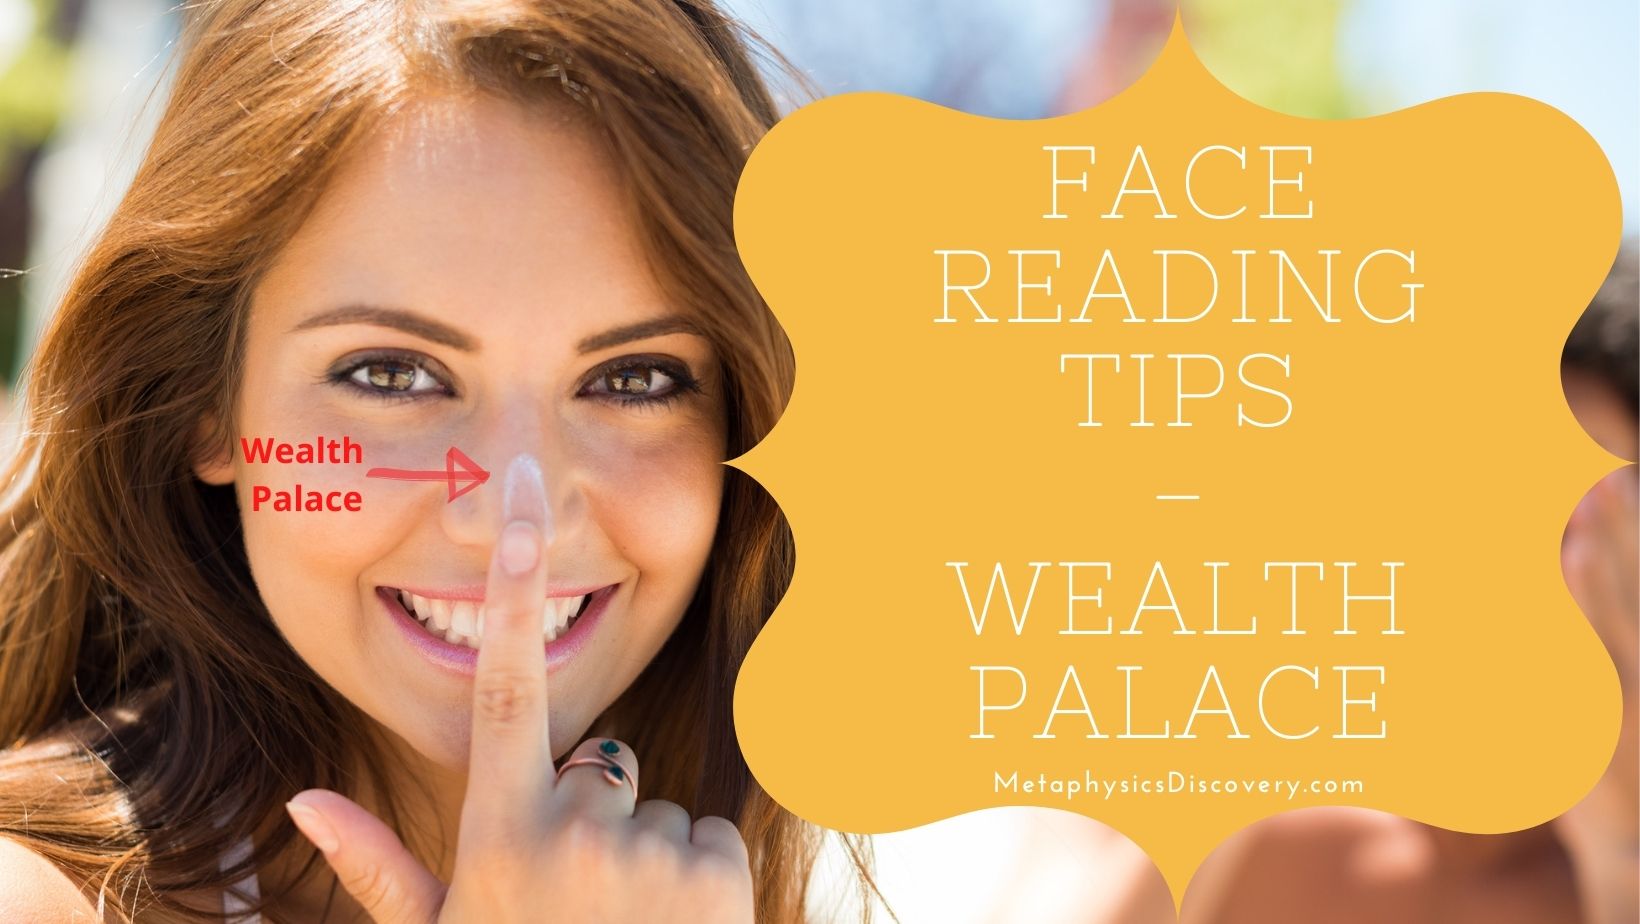 Face Reading Tips for Wealth Palace